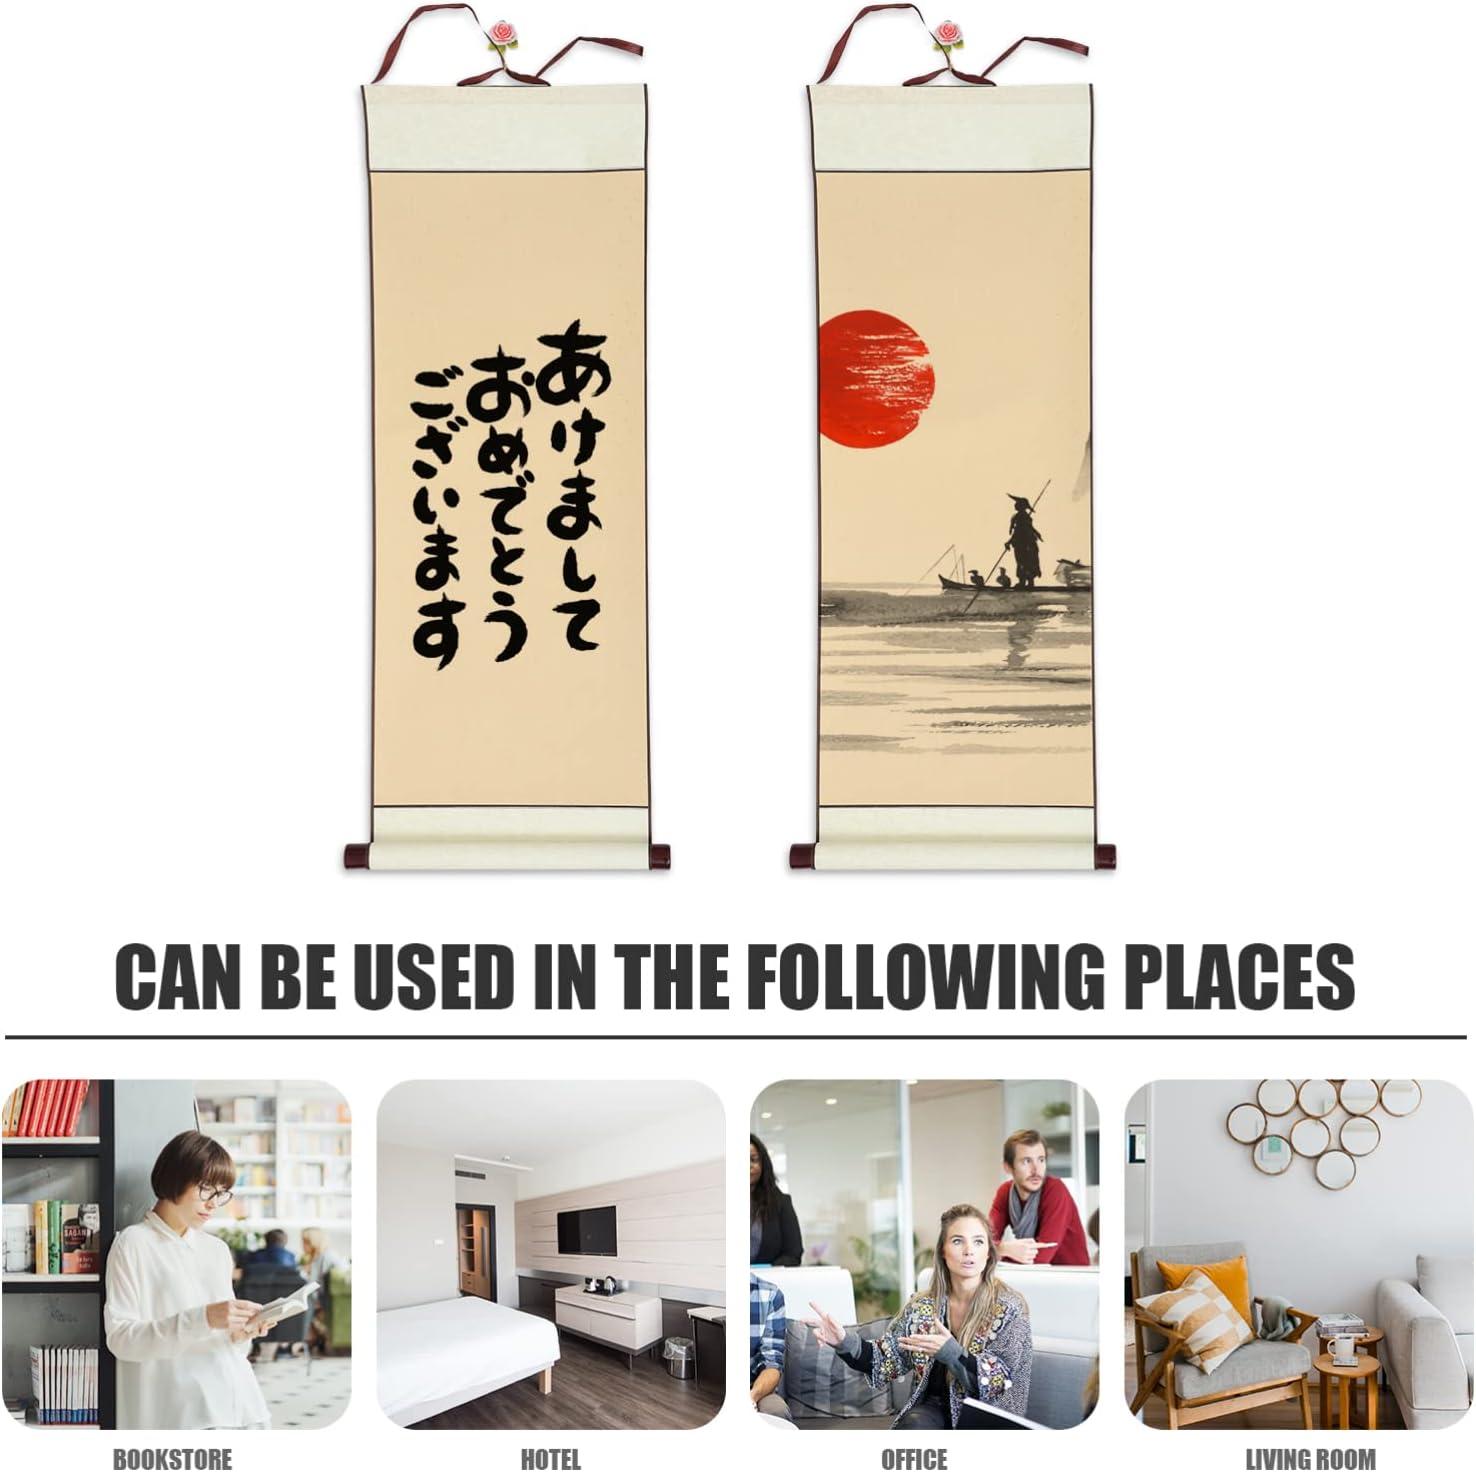 Blank Chinese Scroll Paper Painting Scroll Custom Chinese Calligraphy Paper